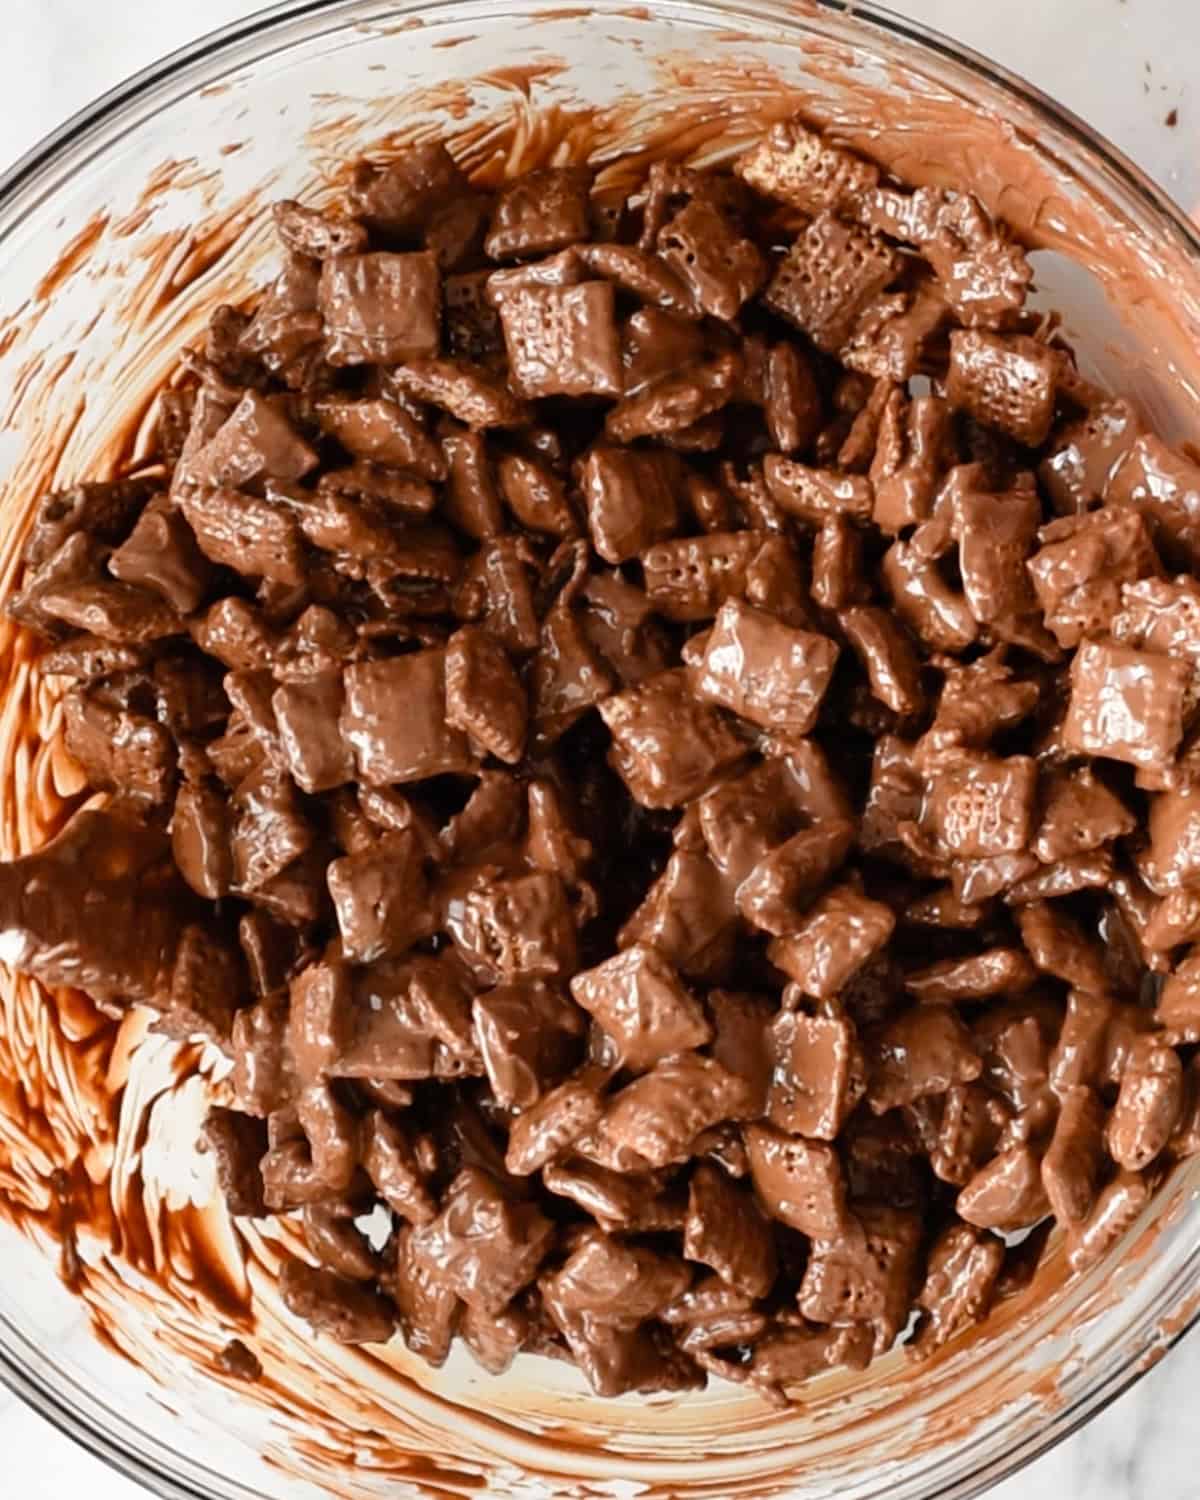 how to make dark chocolate puppy chow - cereal coated with melted chocolate peanut butter mixture in a bowl